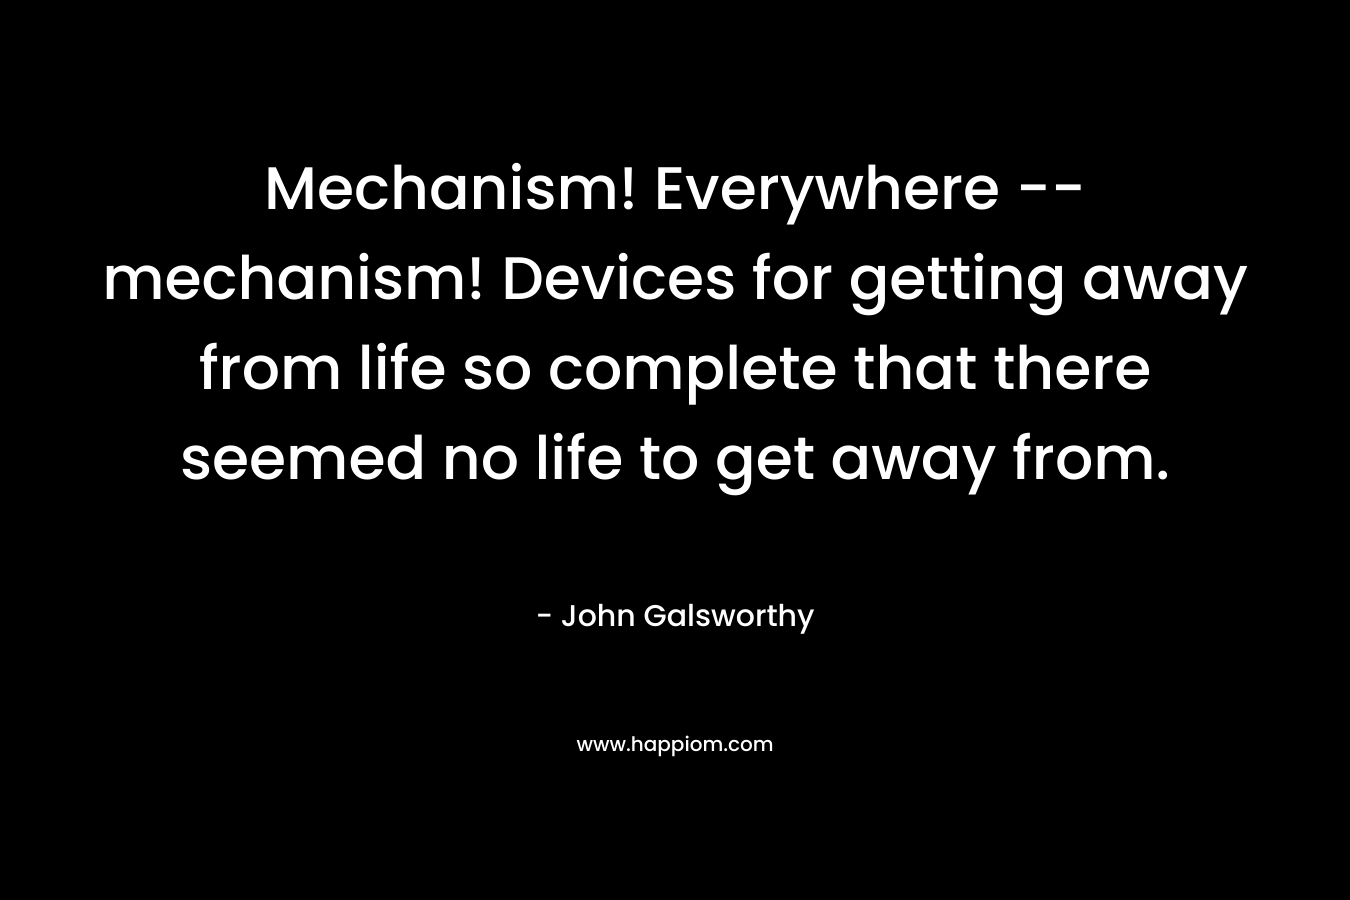 Mechanism! Everywhere -- mechanism! Devices for getting away from life so complete that there seemed no life to get away from.